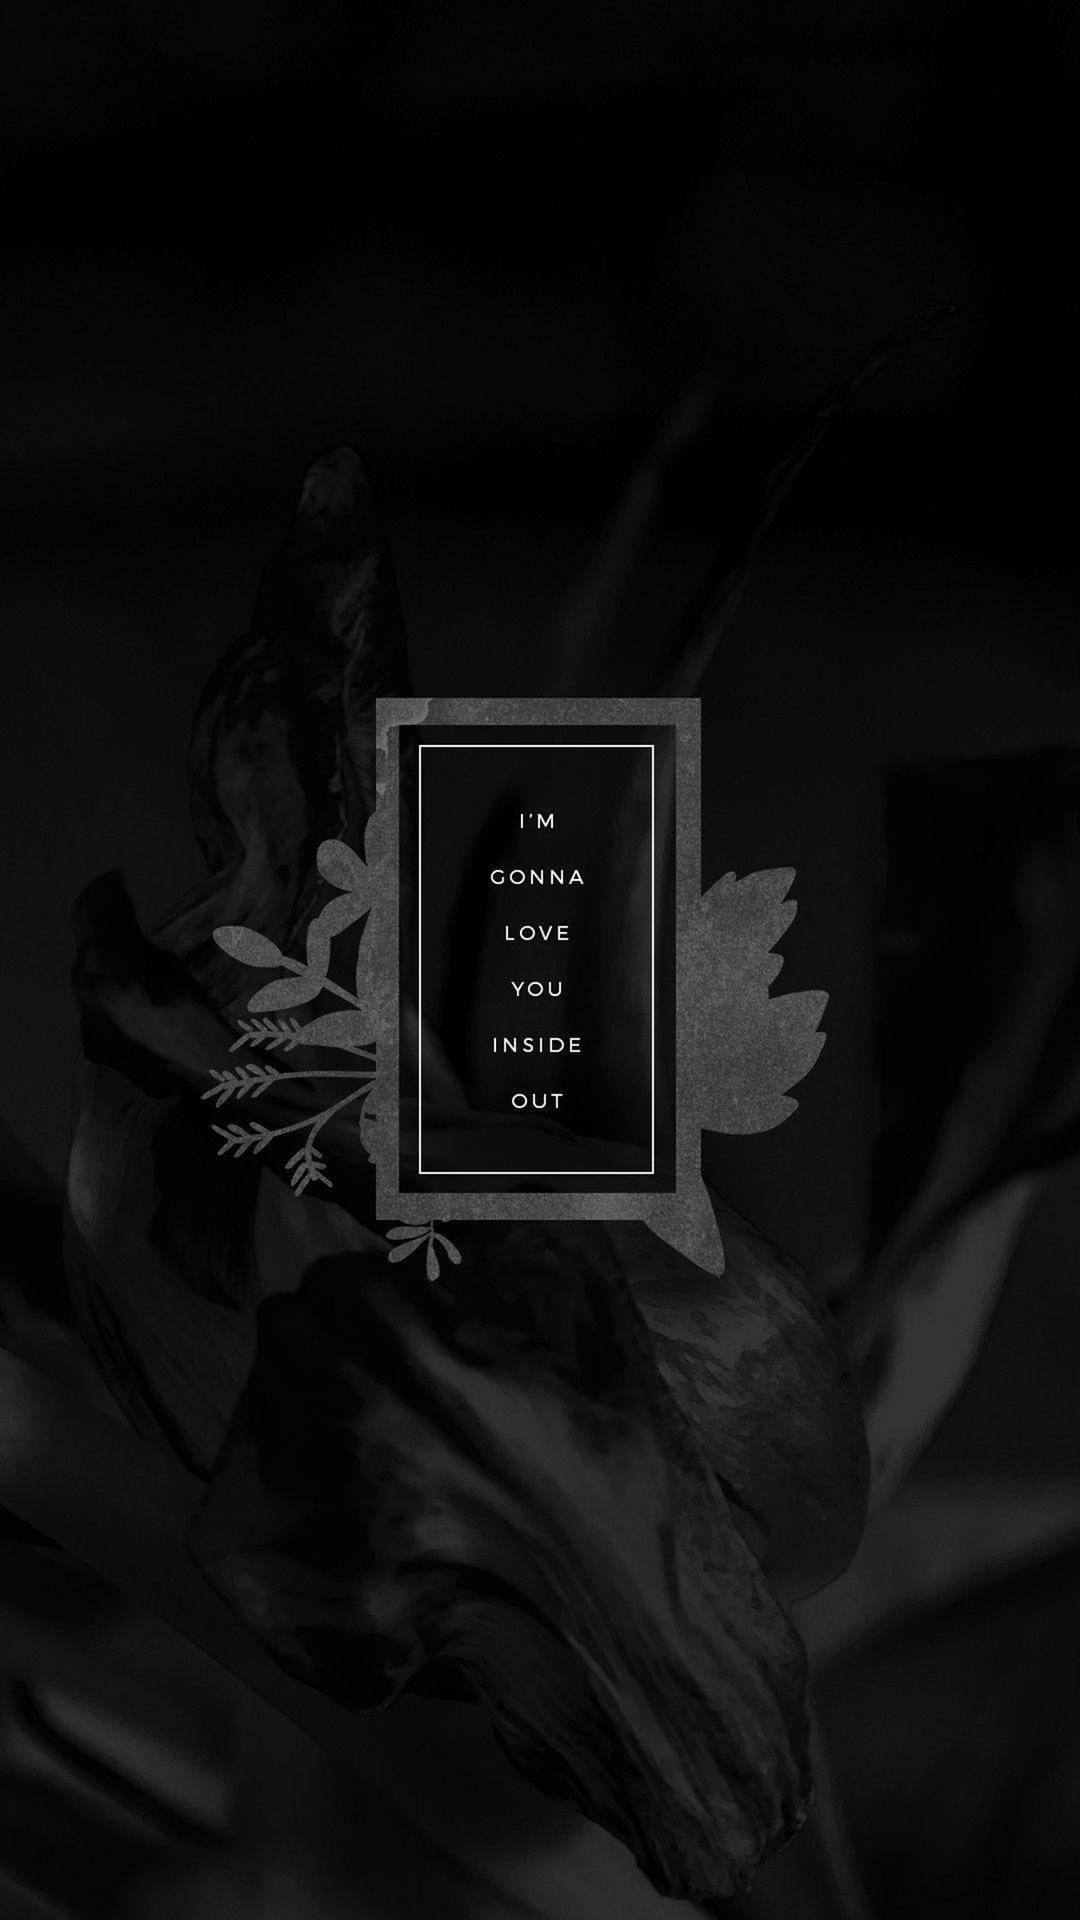 Love Quotation Dope Iphone Background